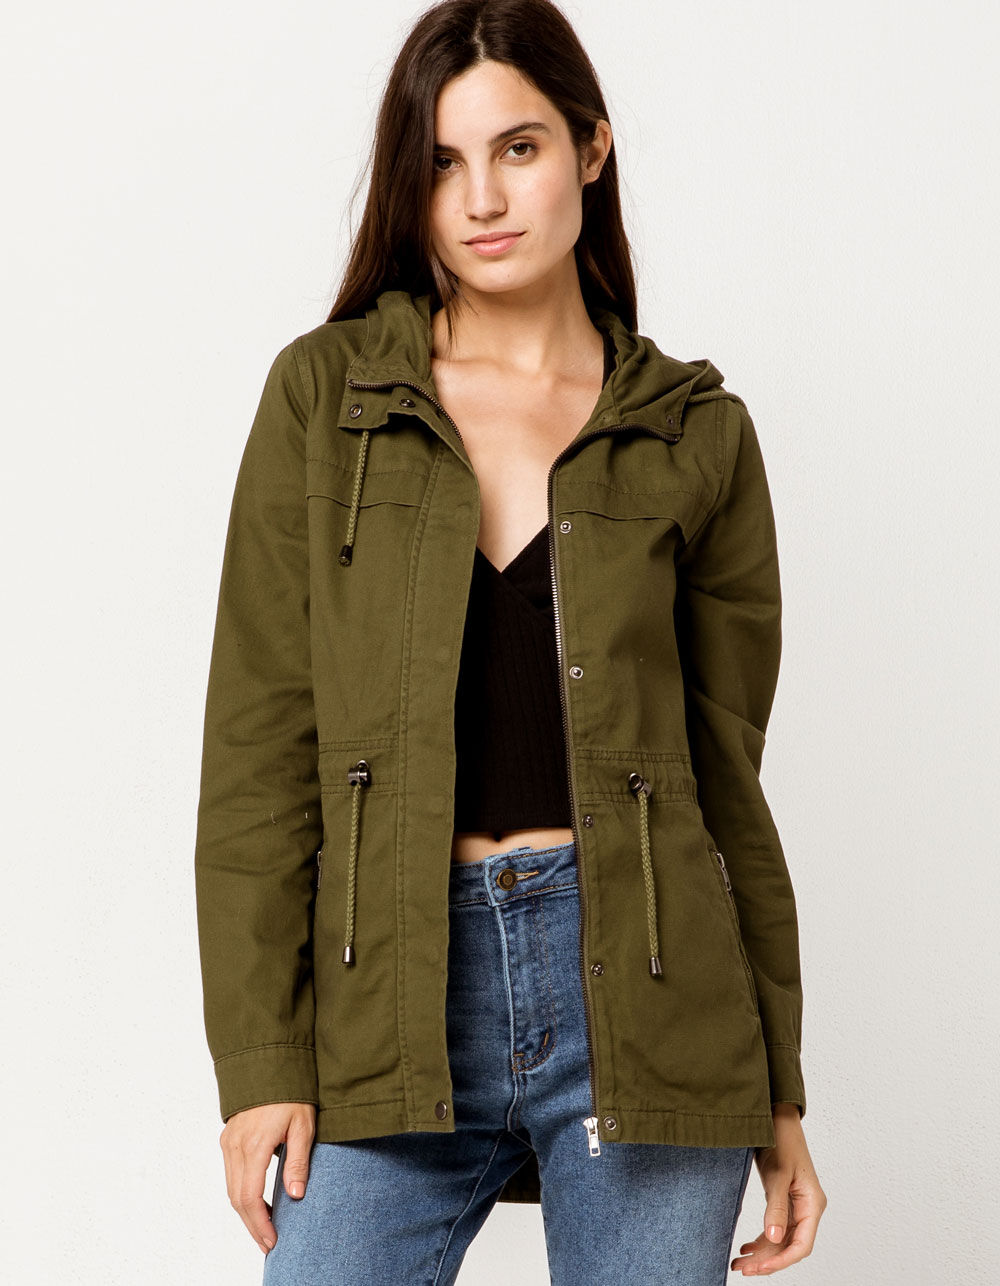 SKY AND SPARROW Womens Anorak Jacket - OLIVE | Tillys